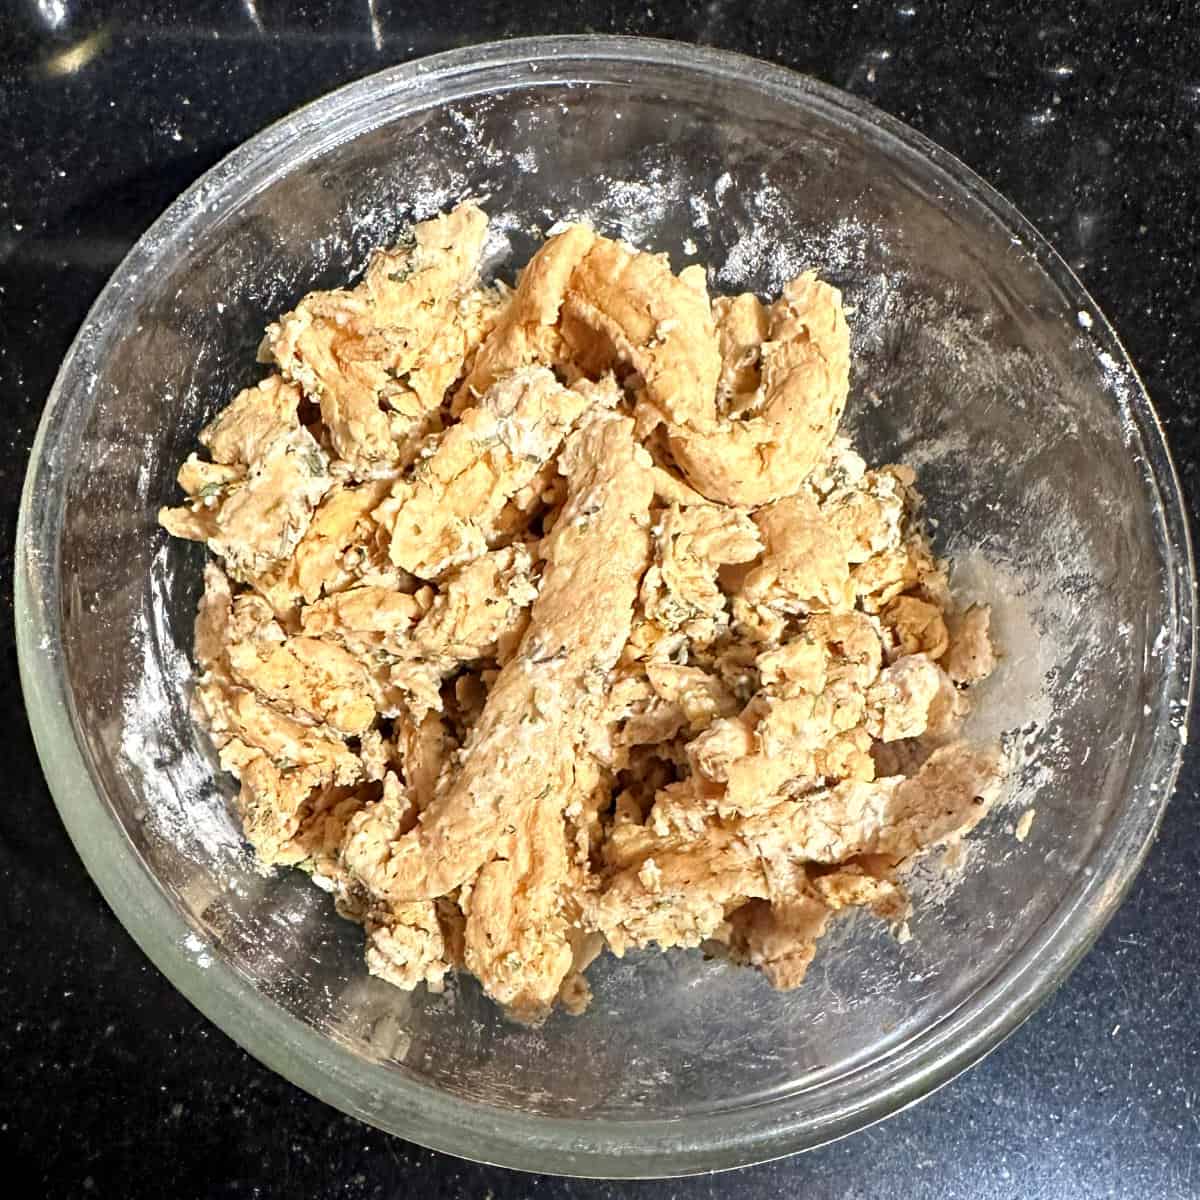 Soy curls coated with flour and herbs in glass bowl.